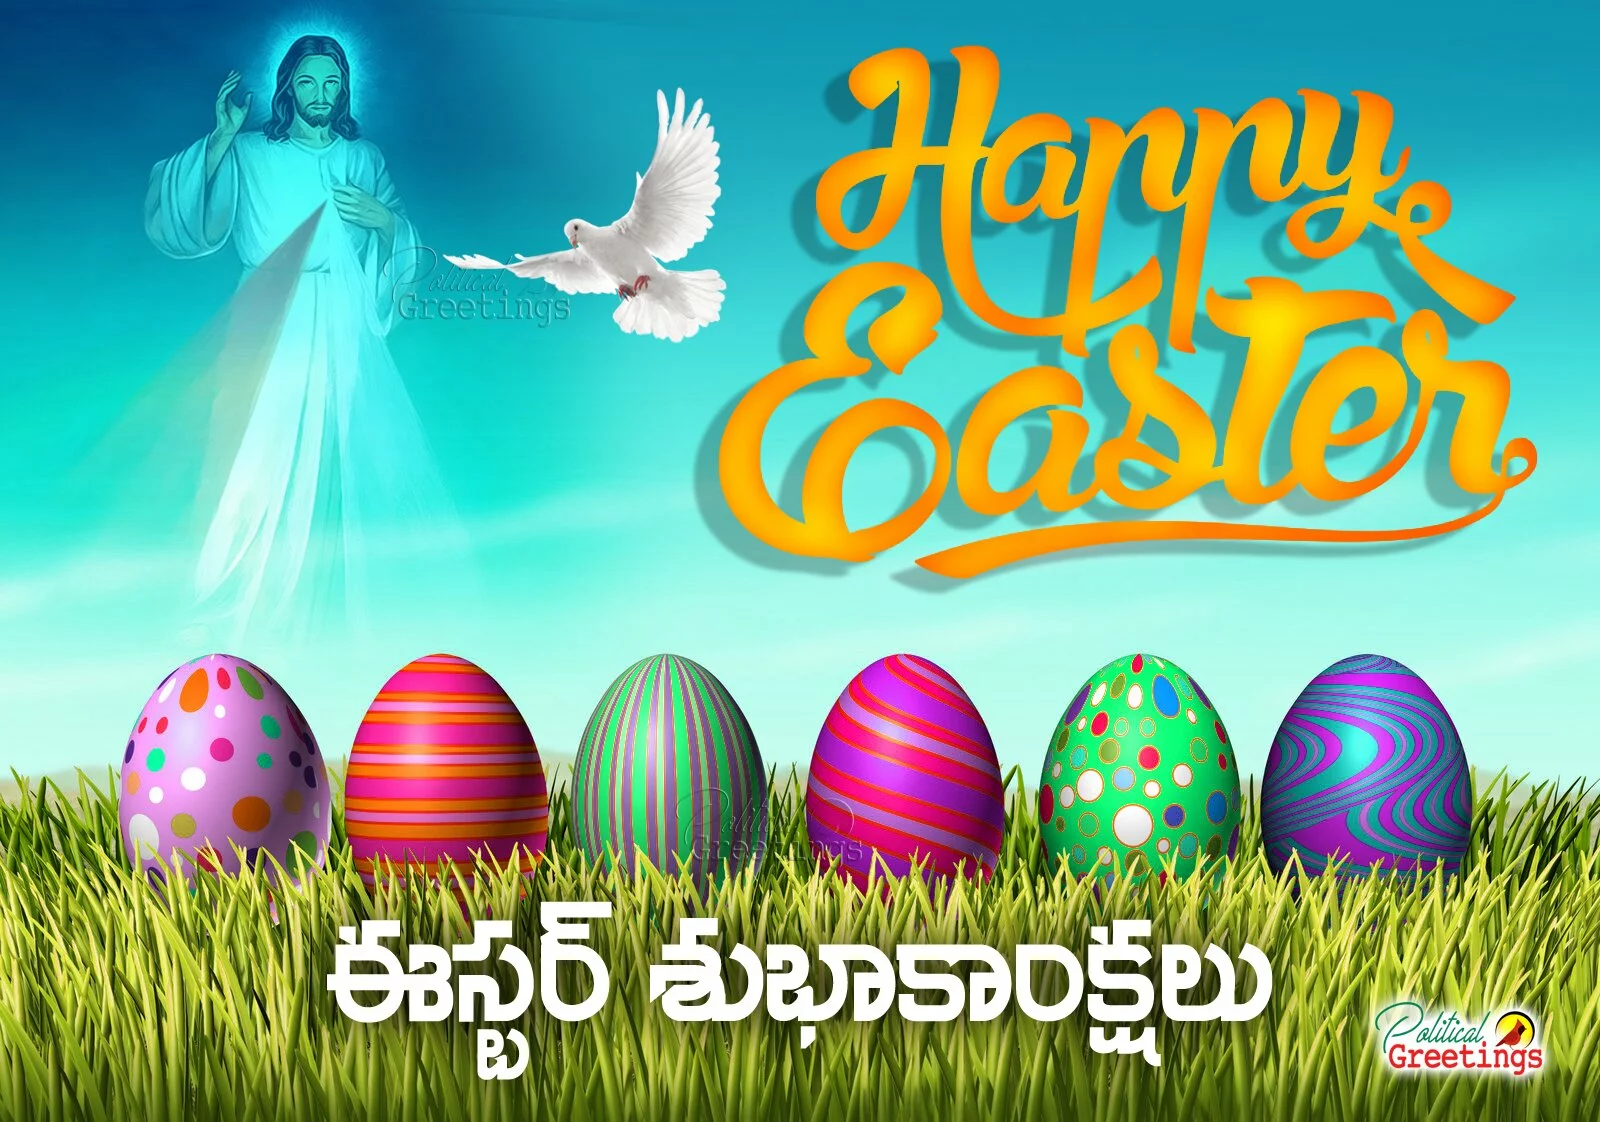 Happy Easter Quotes and Images for Whatsapp